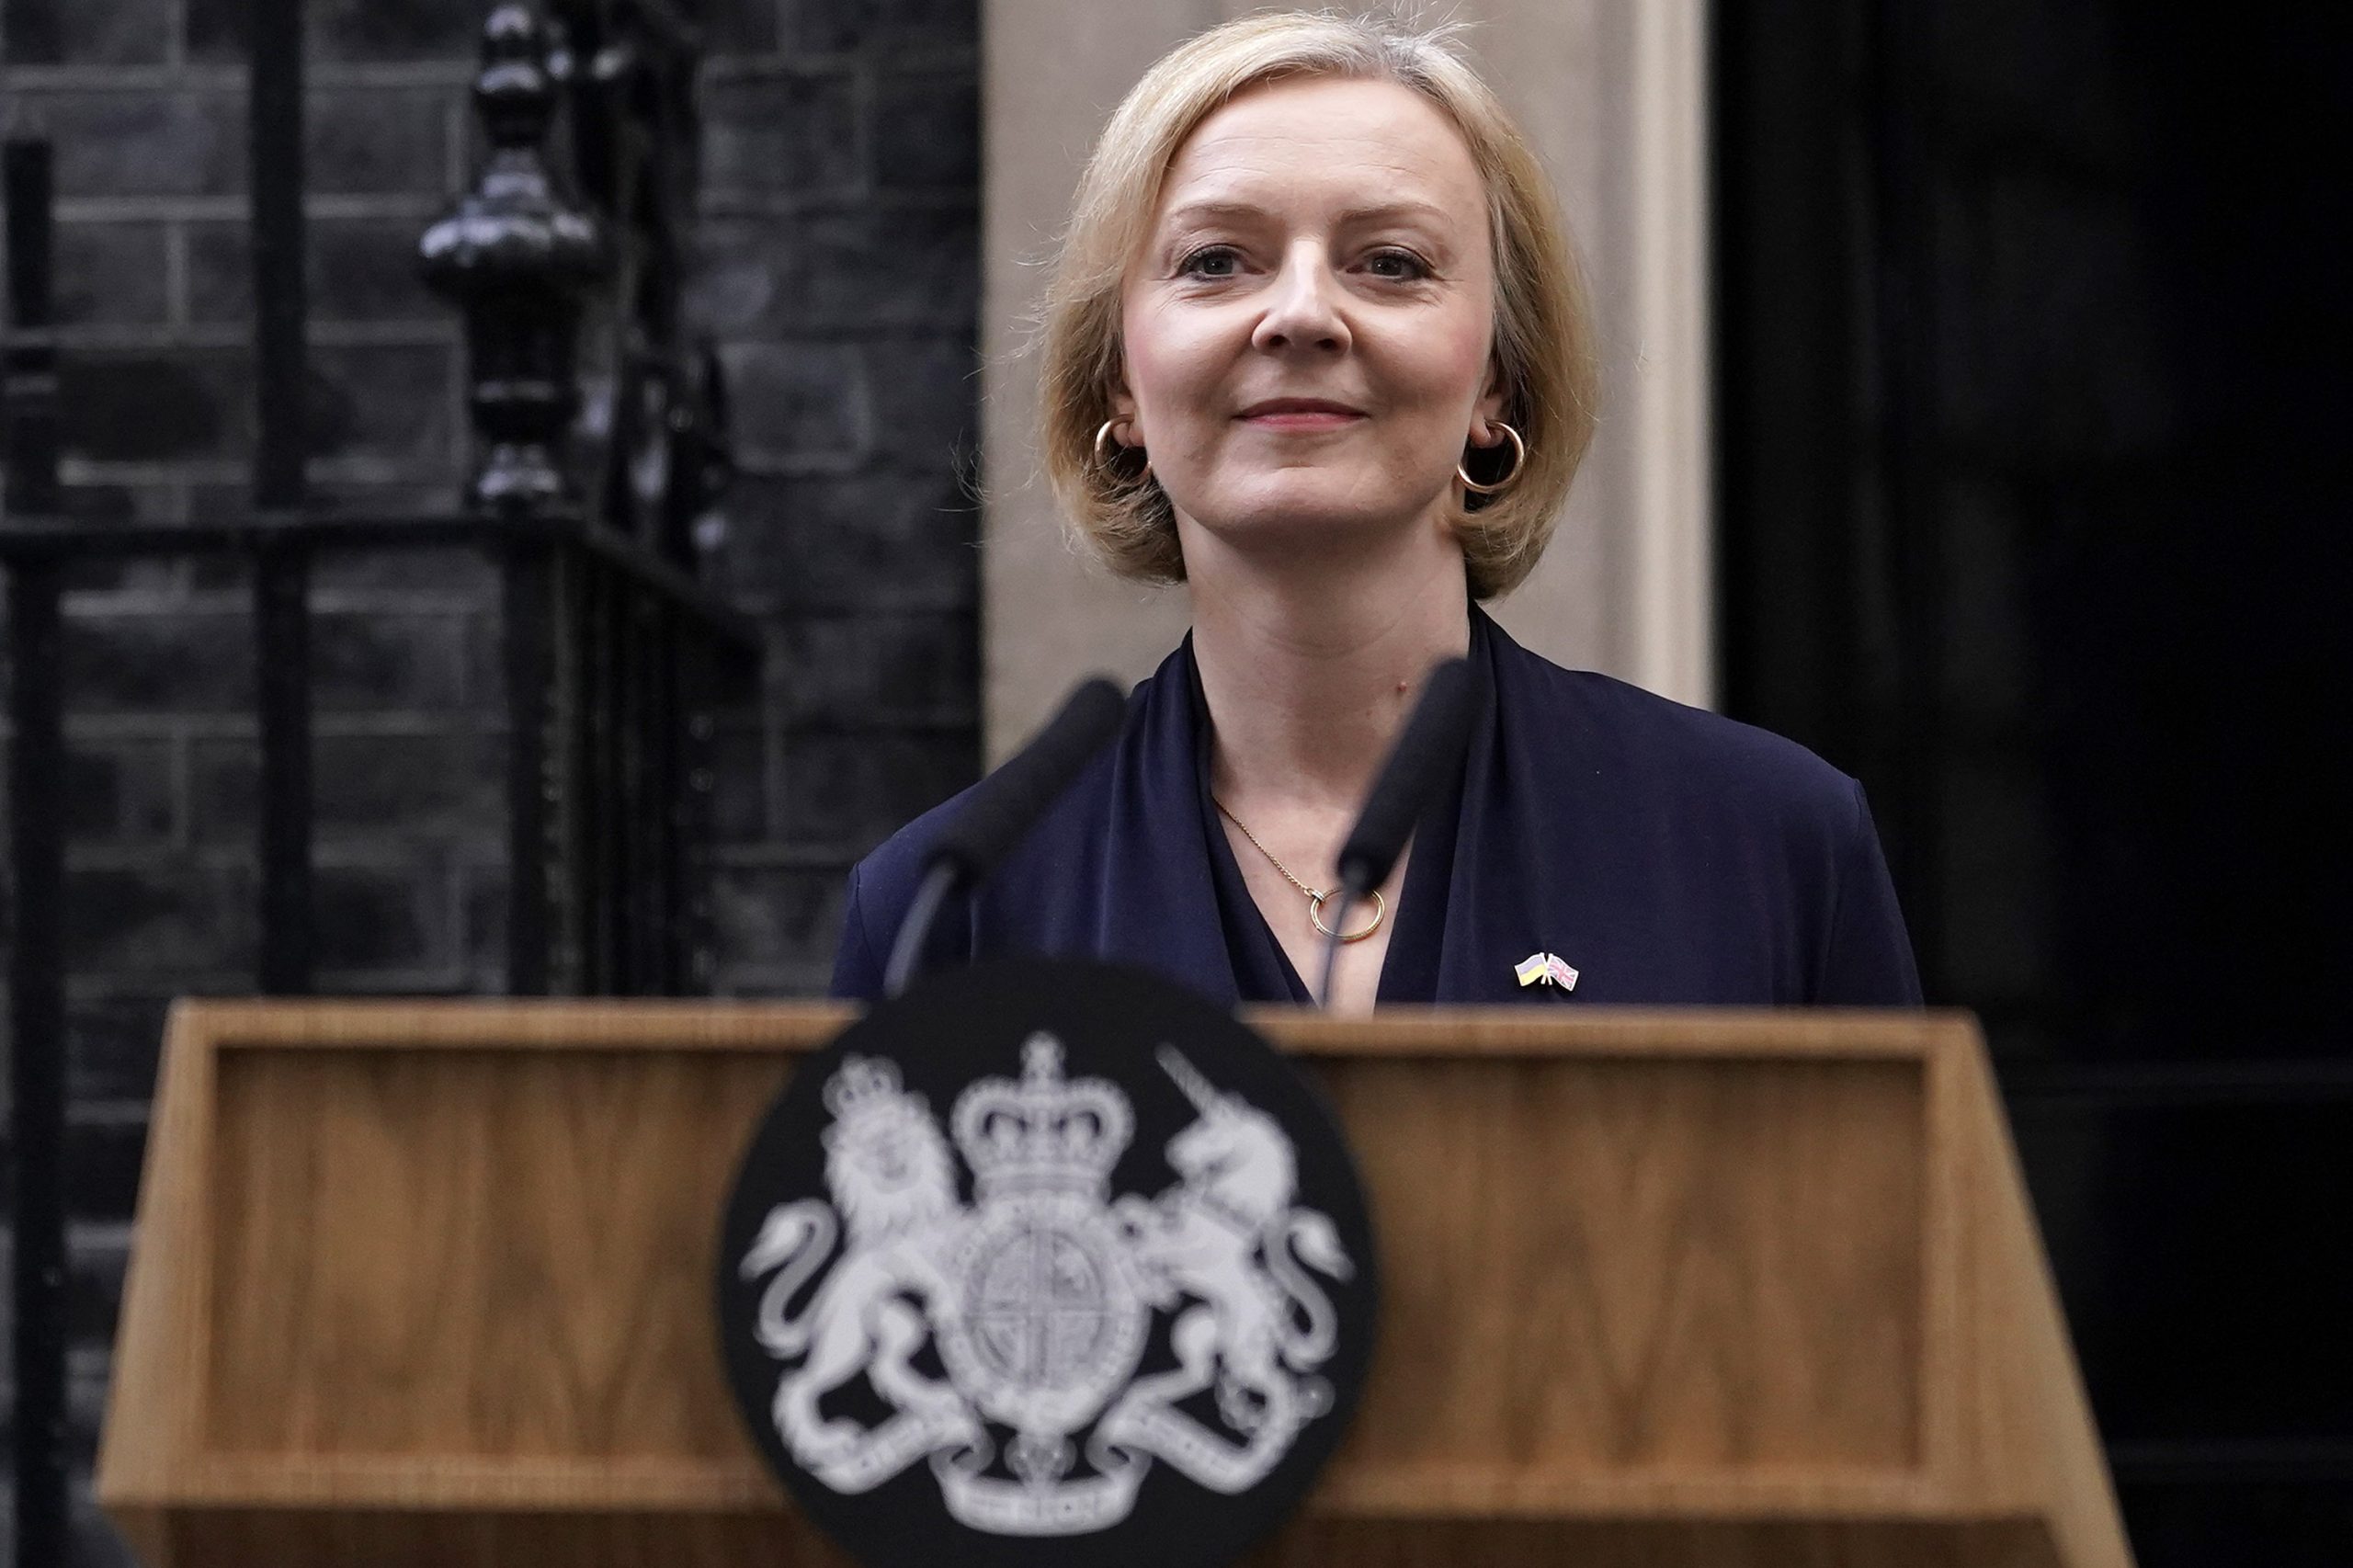 Yes, the Liz Truss debacle matters for Americans